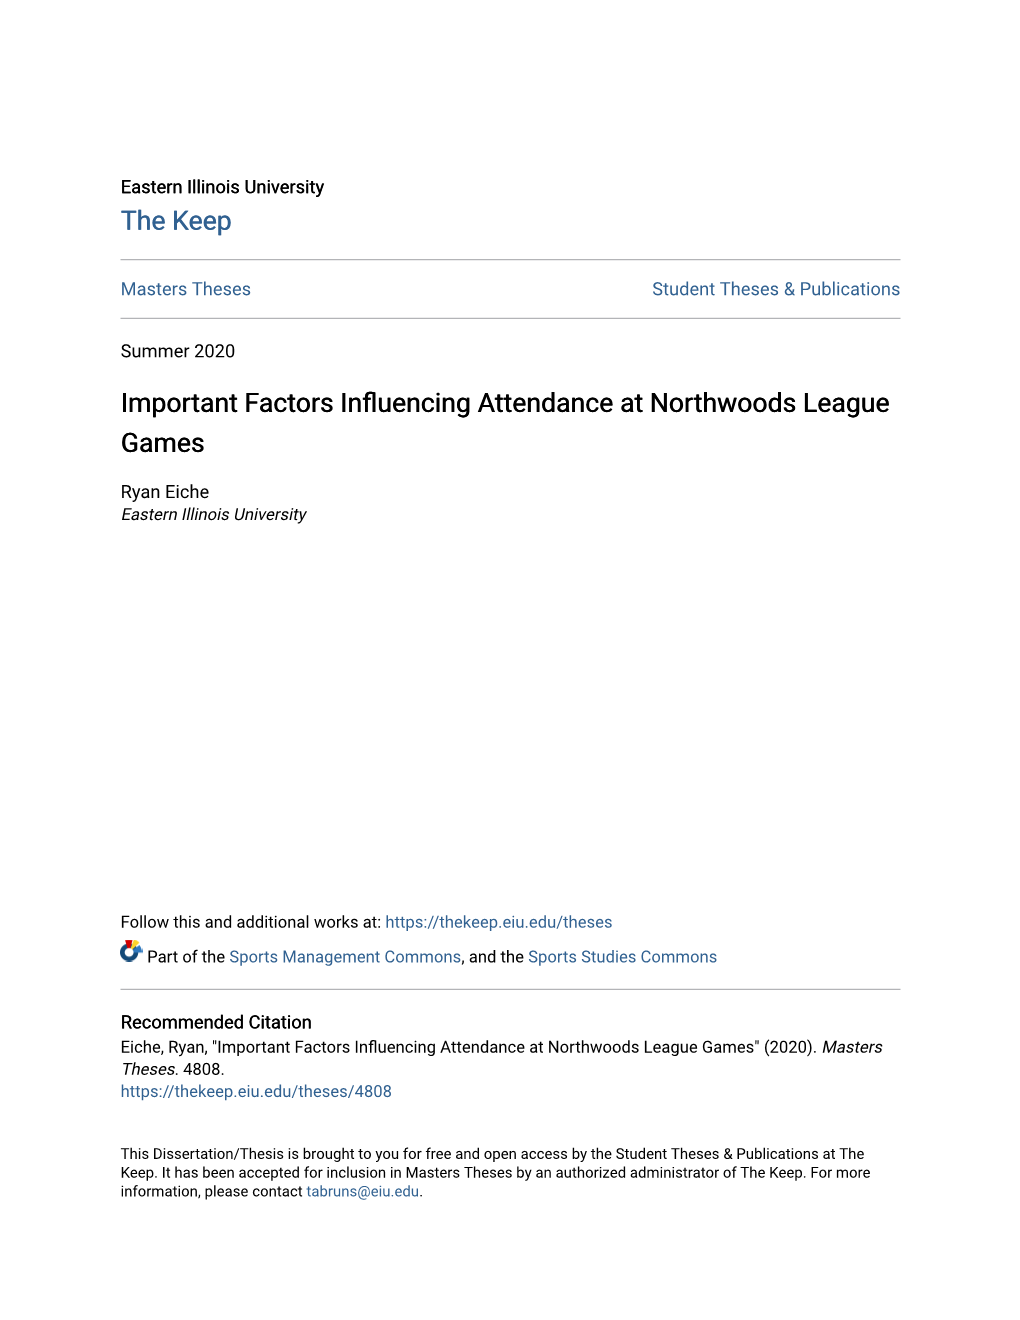 Important Factors Influencing Attendance at Northwoods League Games" (2020)